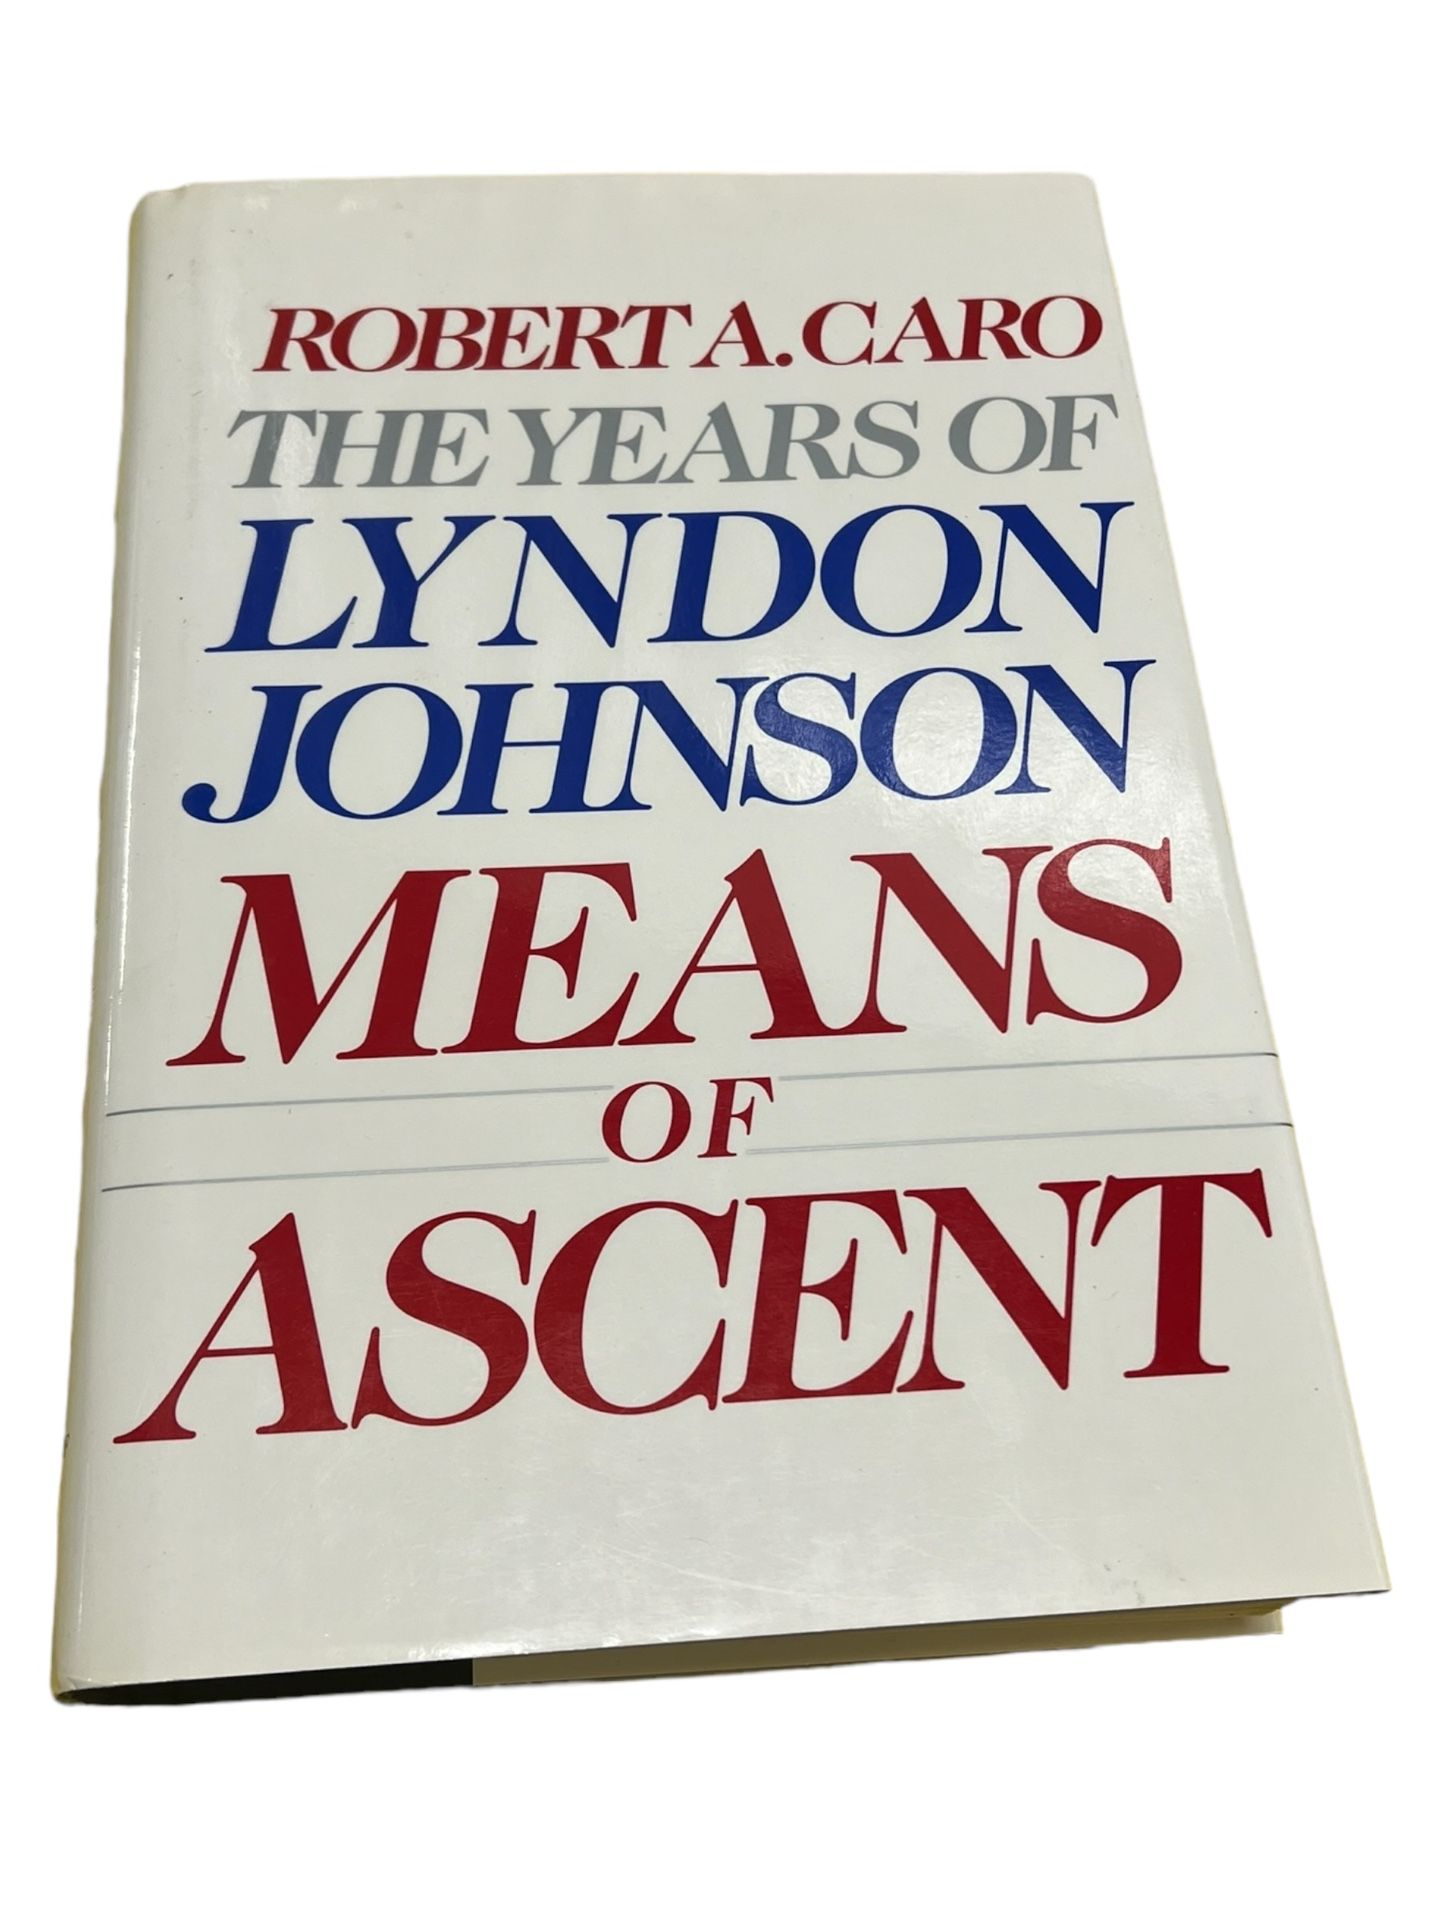 The Years of Lyndon Johnson Means of Ascent Robert A. Caro First Edition  This book by Robert A. Caro, titled "The Years of Lyndon Johnson Means of As